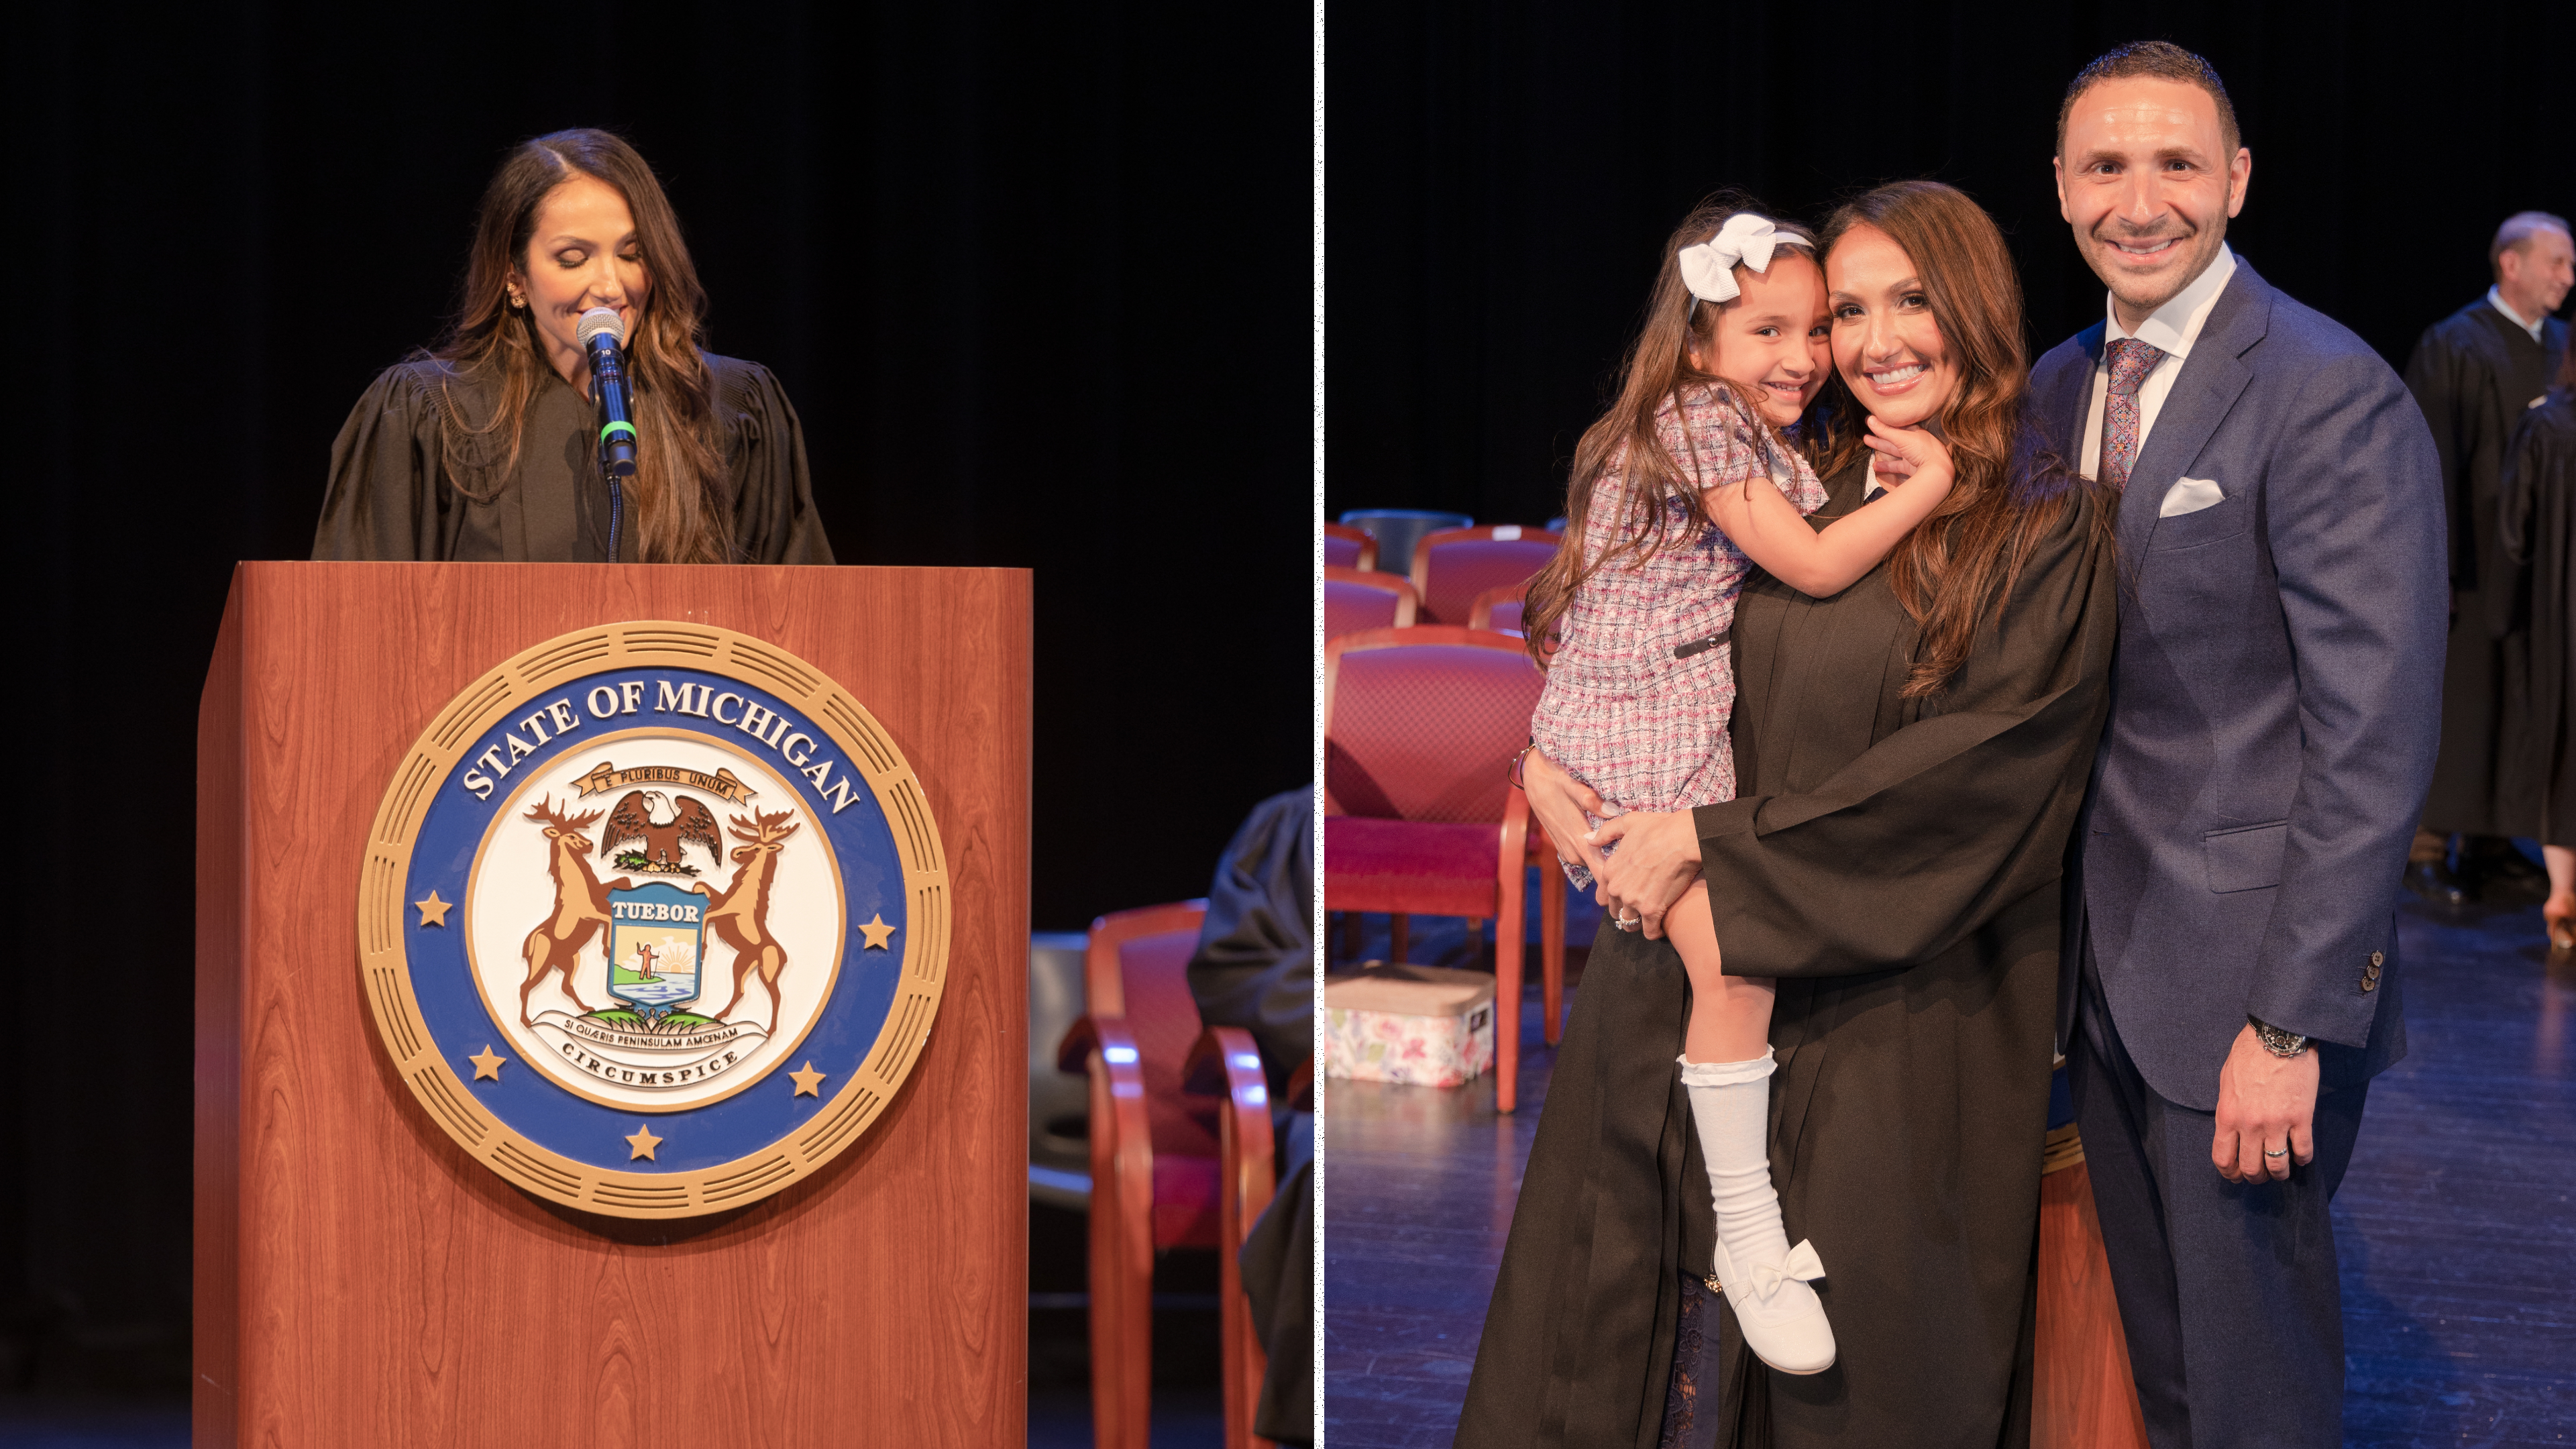 Wayne County Third Circuit Court Judge Yvonna Abraham speaks at her investiture ceremony and poses with her family at the Ford Community and Performing and Arts Center in Dearborn, May 16. Photos: Bill Chapman